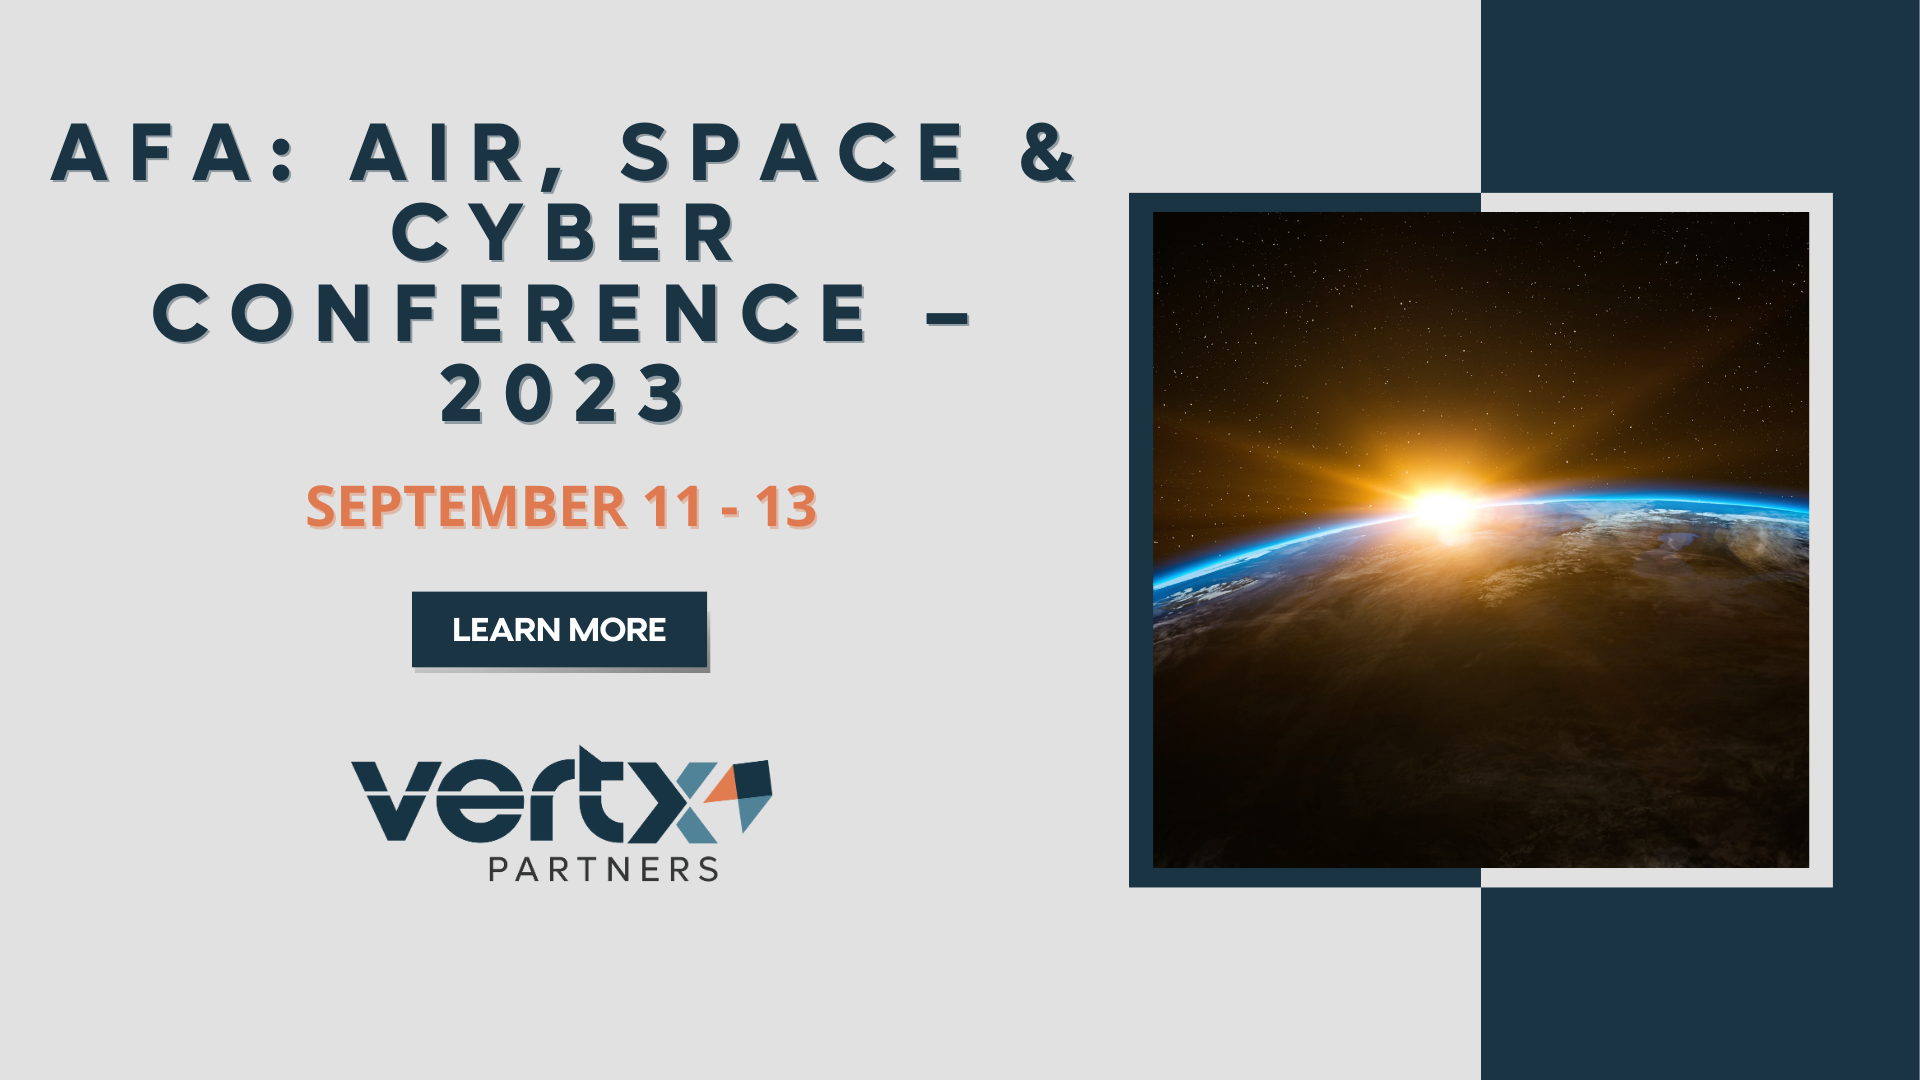 The graphic has the title "AFA: AIR, SPACE & CYBER CONFERENCE – 2023" with the date september 11th-13th underneath and a photo of the earth and the sun in space to the right of it.